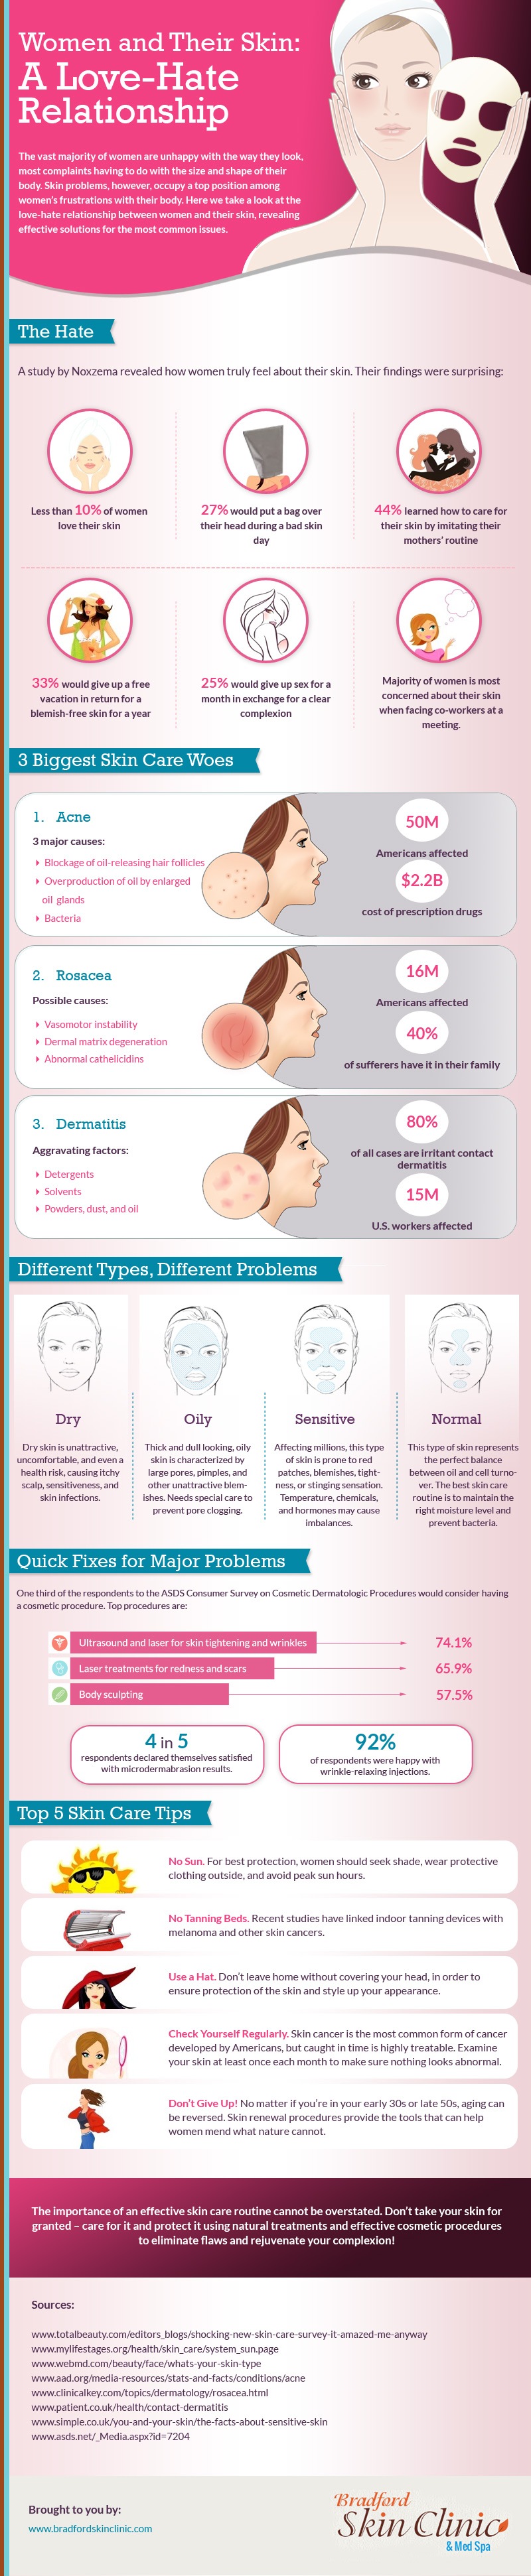 Women and Their Skin: A Love-Hate Relationship Infographic